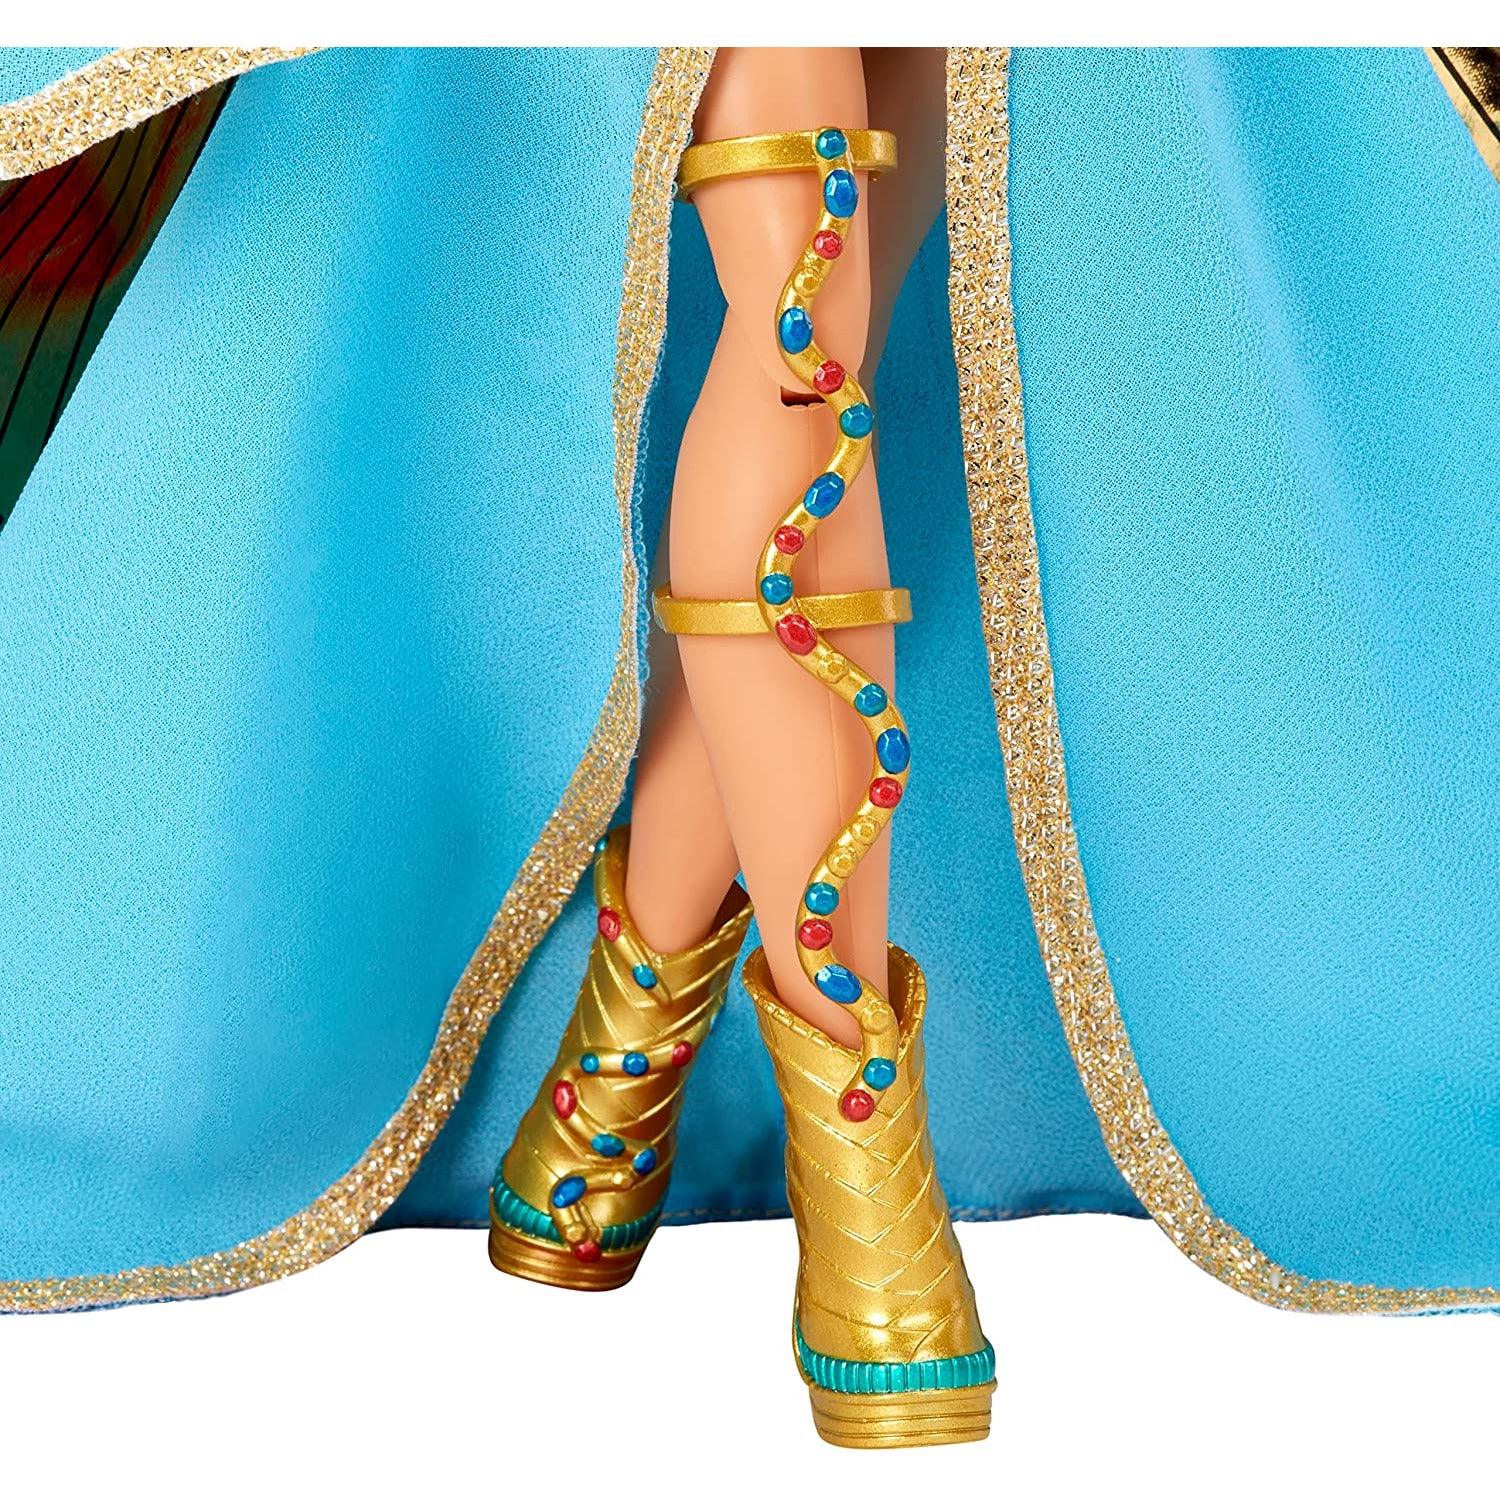 LOL Surprise OMG Fierce Collector Cleopatra Fashion Doll- Premium Collector Doll with Luxe Blue & Gold Royal Outfit Accessories - BumbleToys - 5-7 Years, Dolls, Girls, L.O.L, Miniature Dolls & Accessories, OXE, Pre-Order